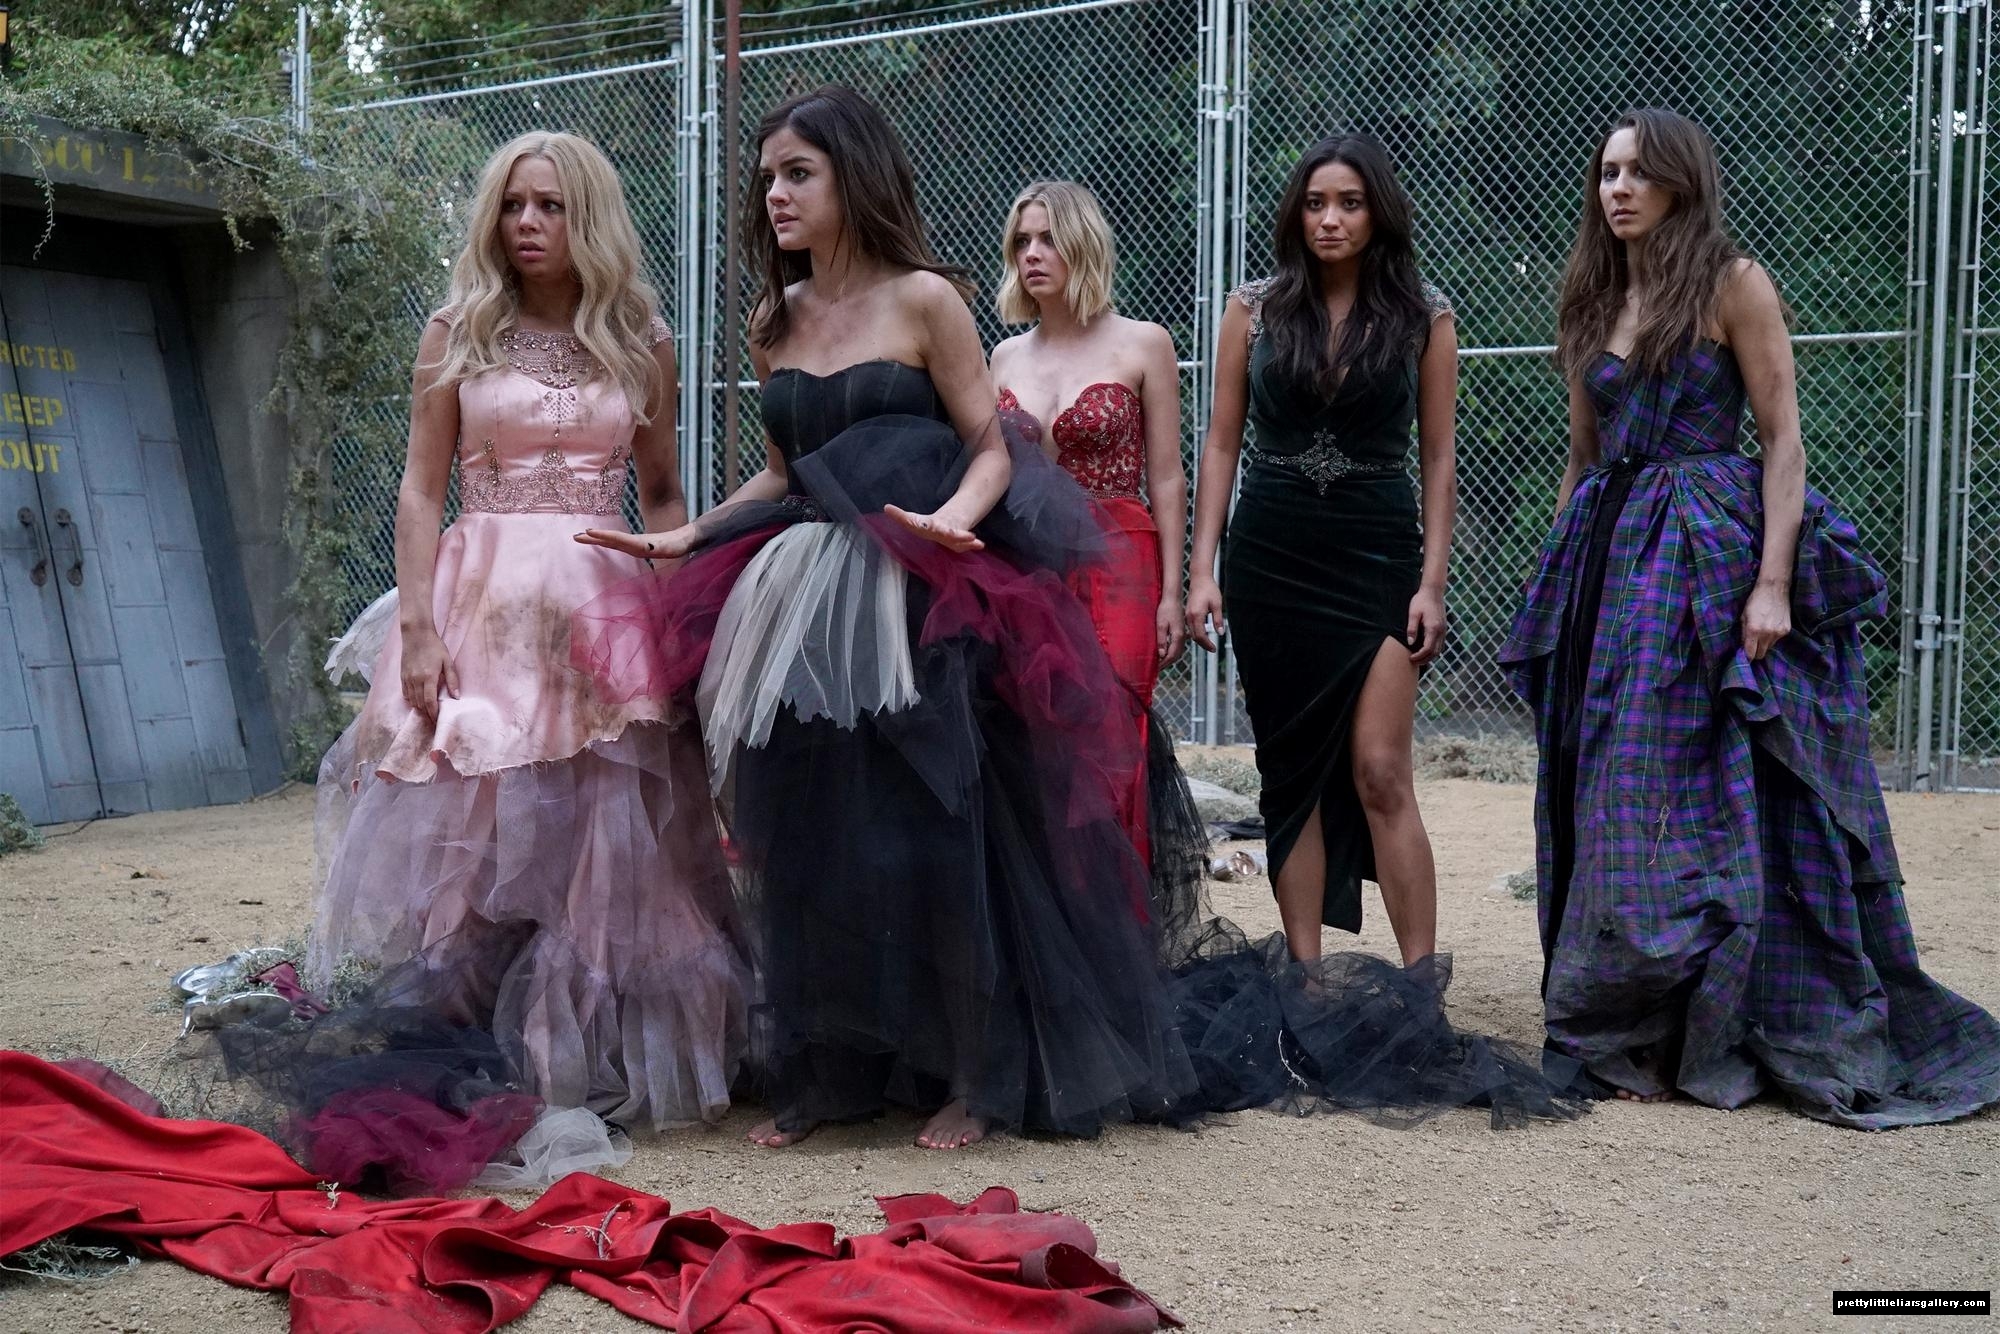 Im Glad All The Liars Are Barefoot That Would Make The Season 6